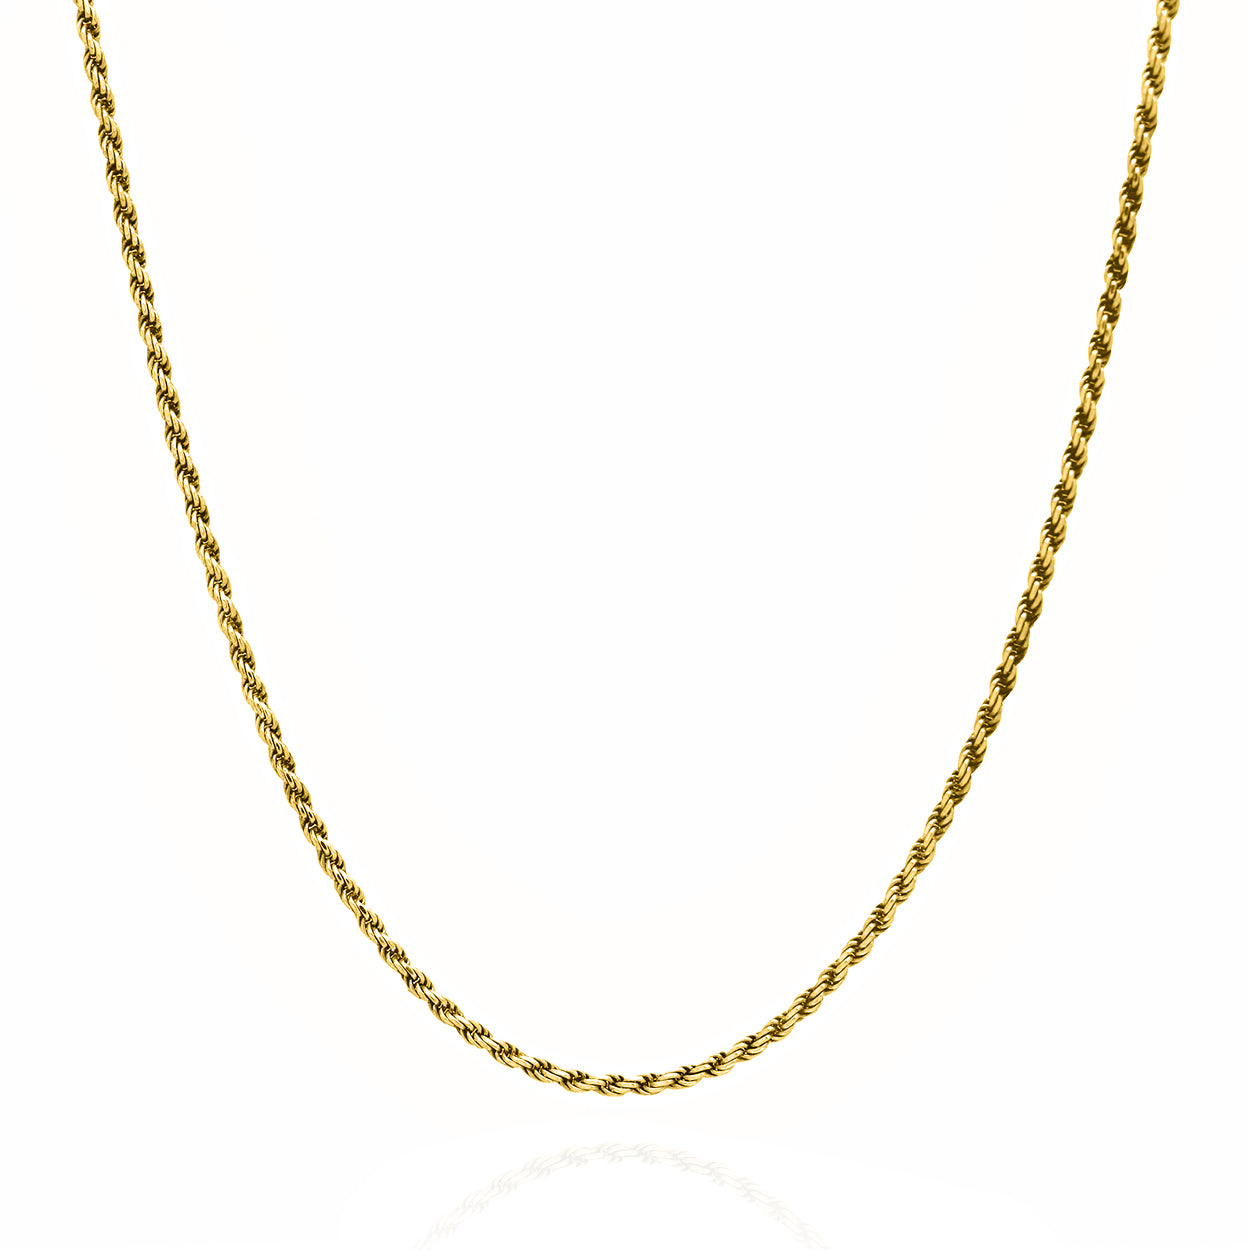 2mm Wide Rope Style Chain Solid Gold Yellow